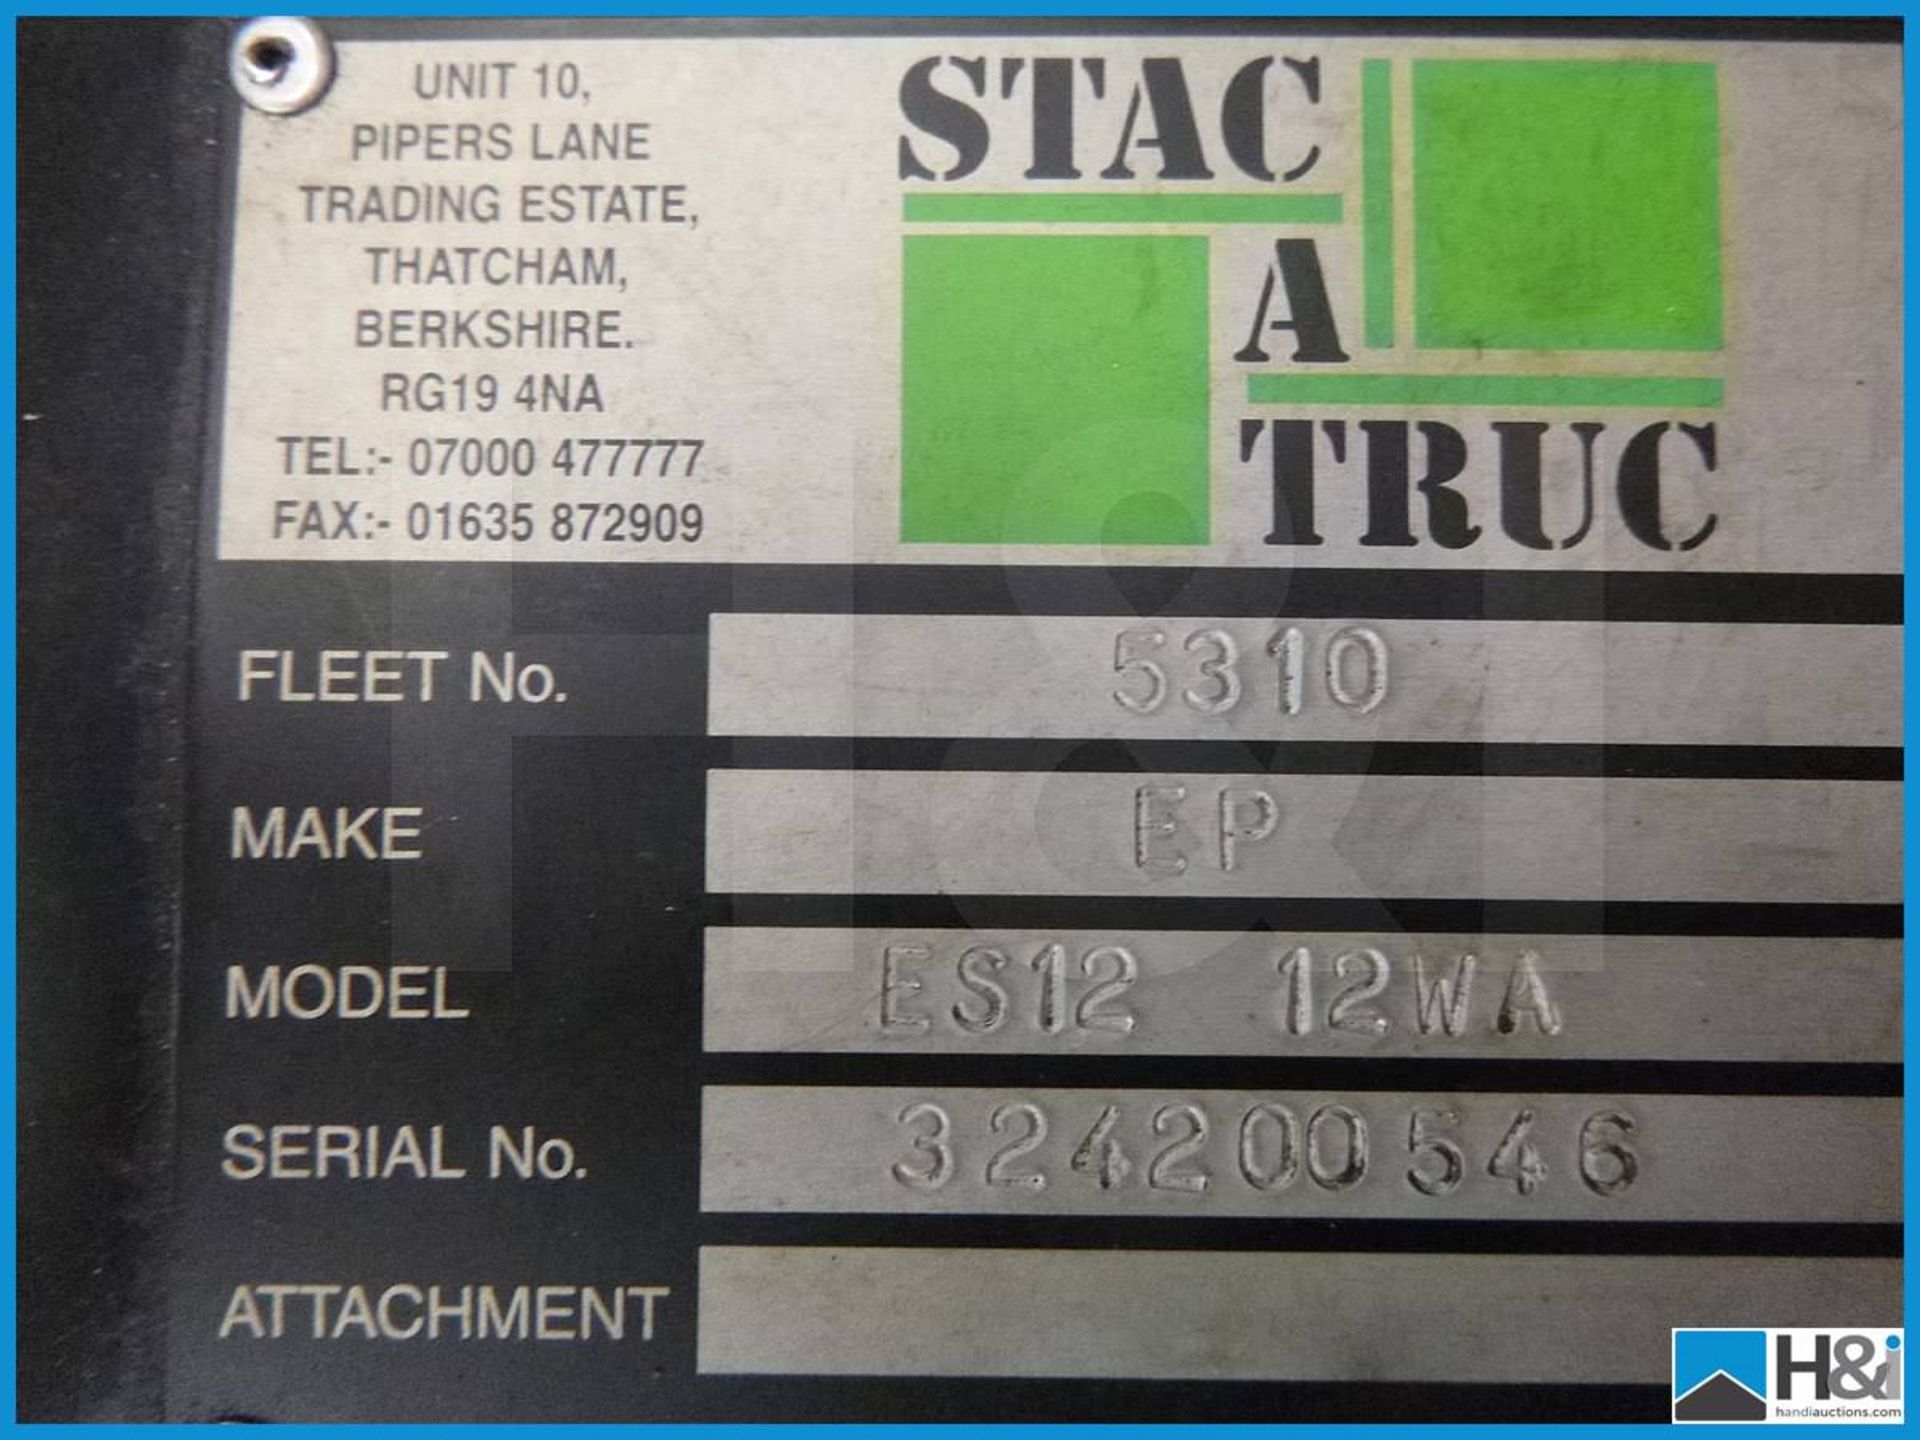 STAK-A-TRUC ES12 12WA, PEDESTRIAN ELECTRIC FORKLIFT TRUCK, 93 HOURS ONLY, SERIAL NUMBER 324200546, - Image 4 of 7